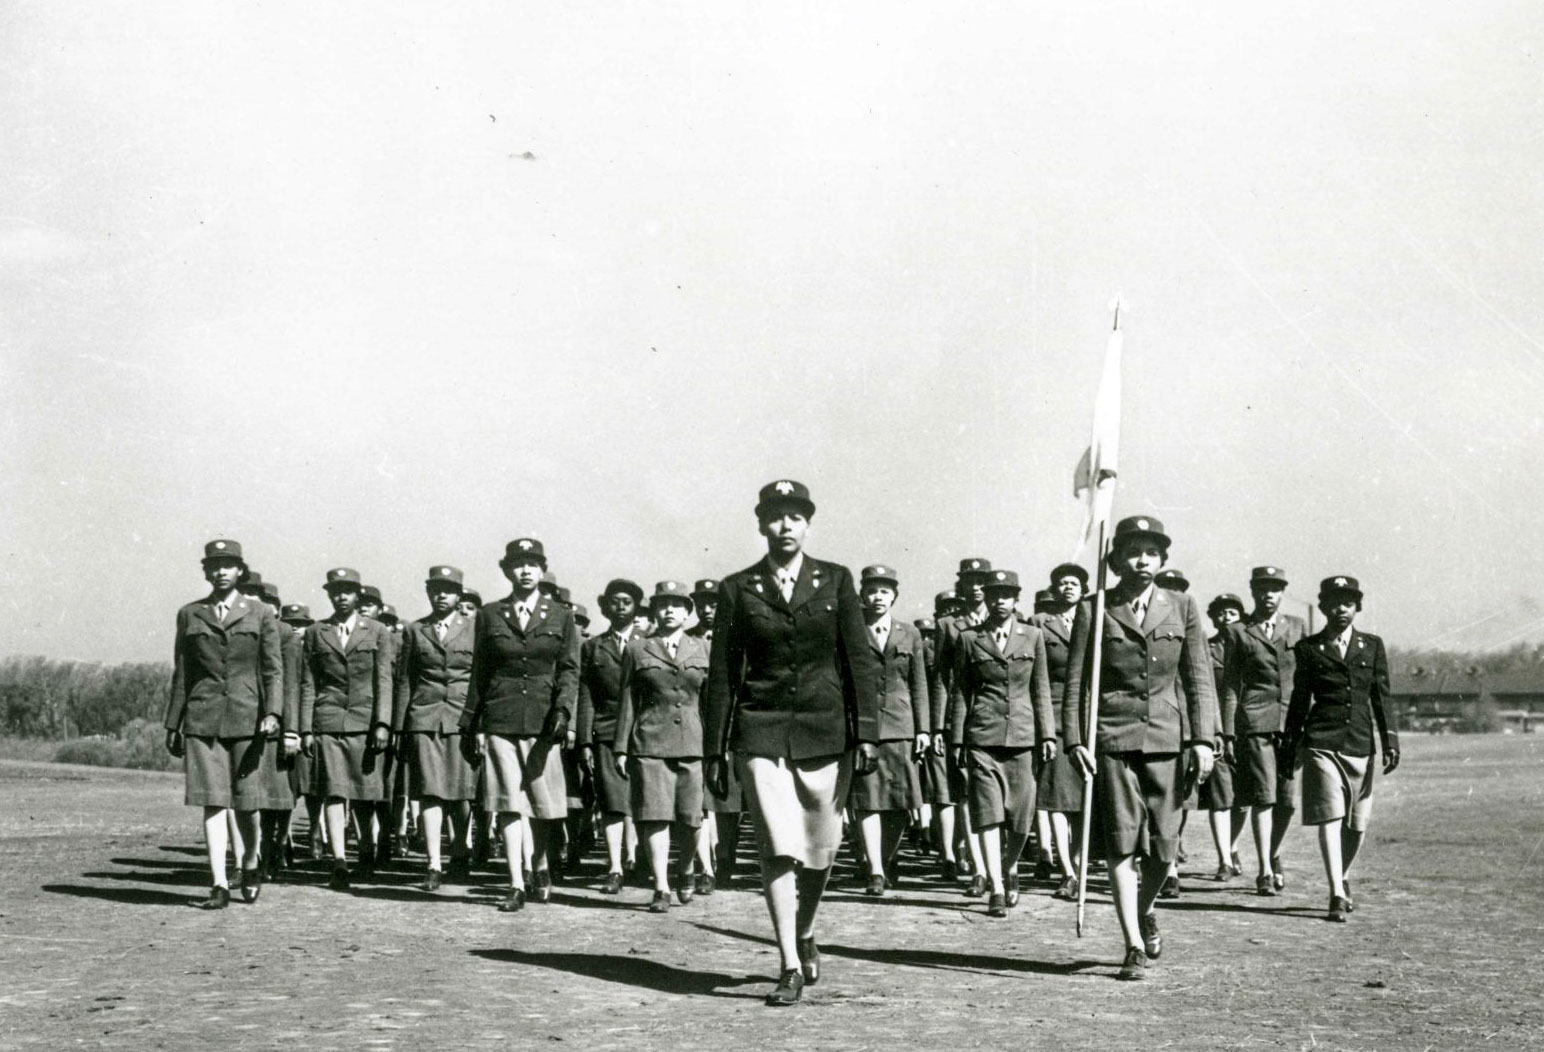 Soldiers of the 6888th marching in formation. Photo by anonymous (c. 1945). PD-U.S. Government.